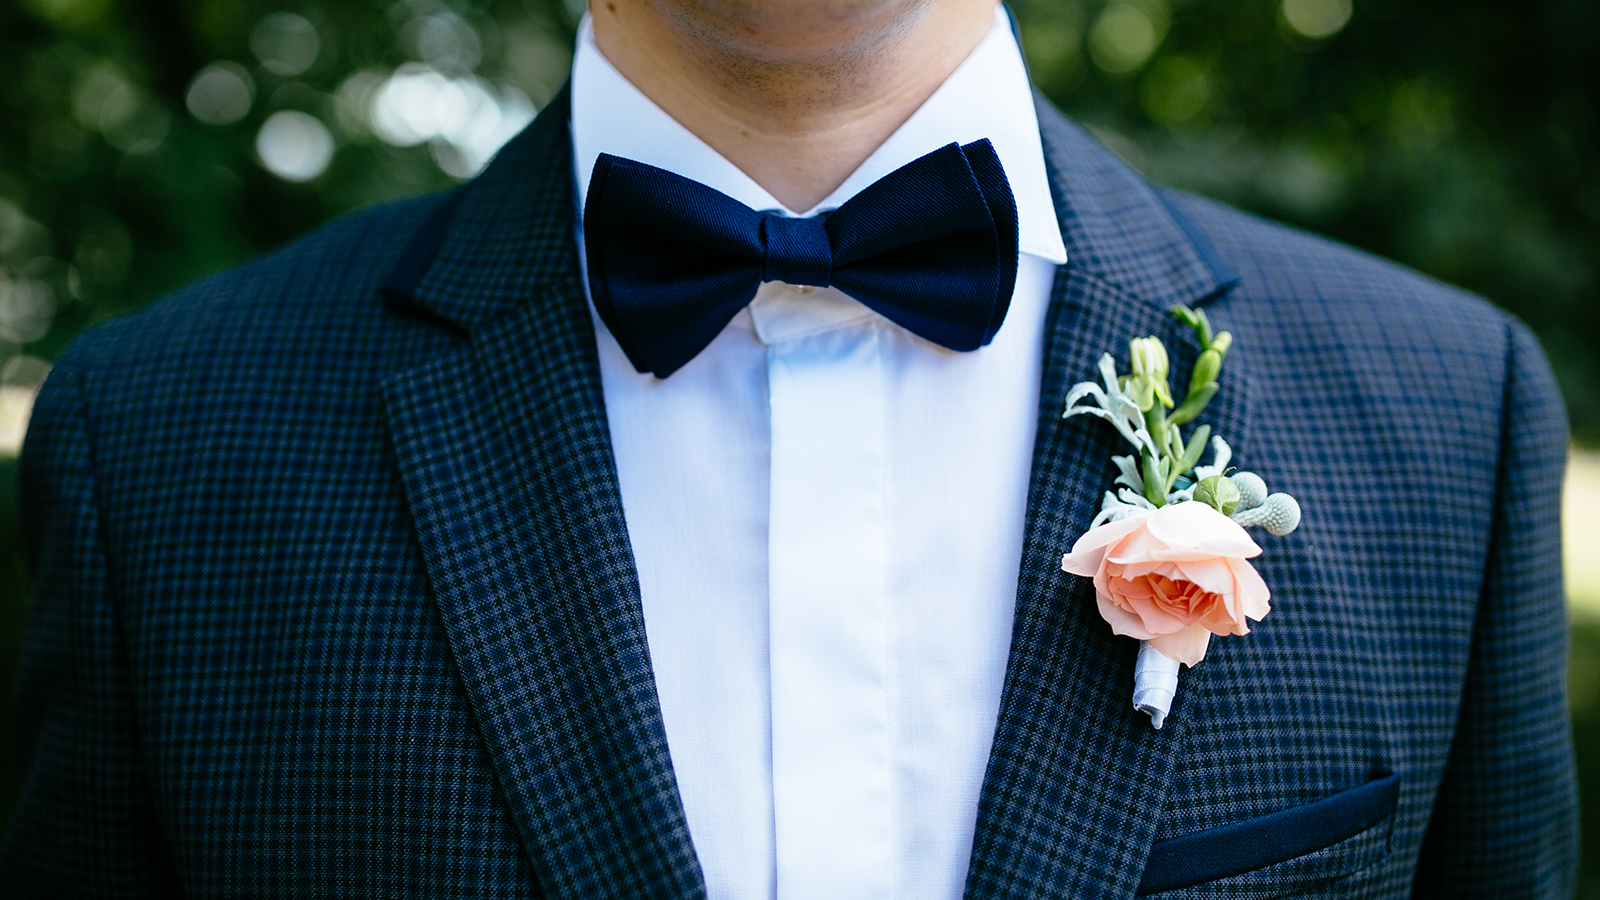 The groom in a suit with a buttonhole and a butterfly